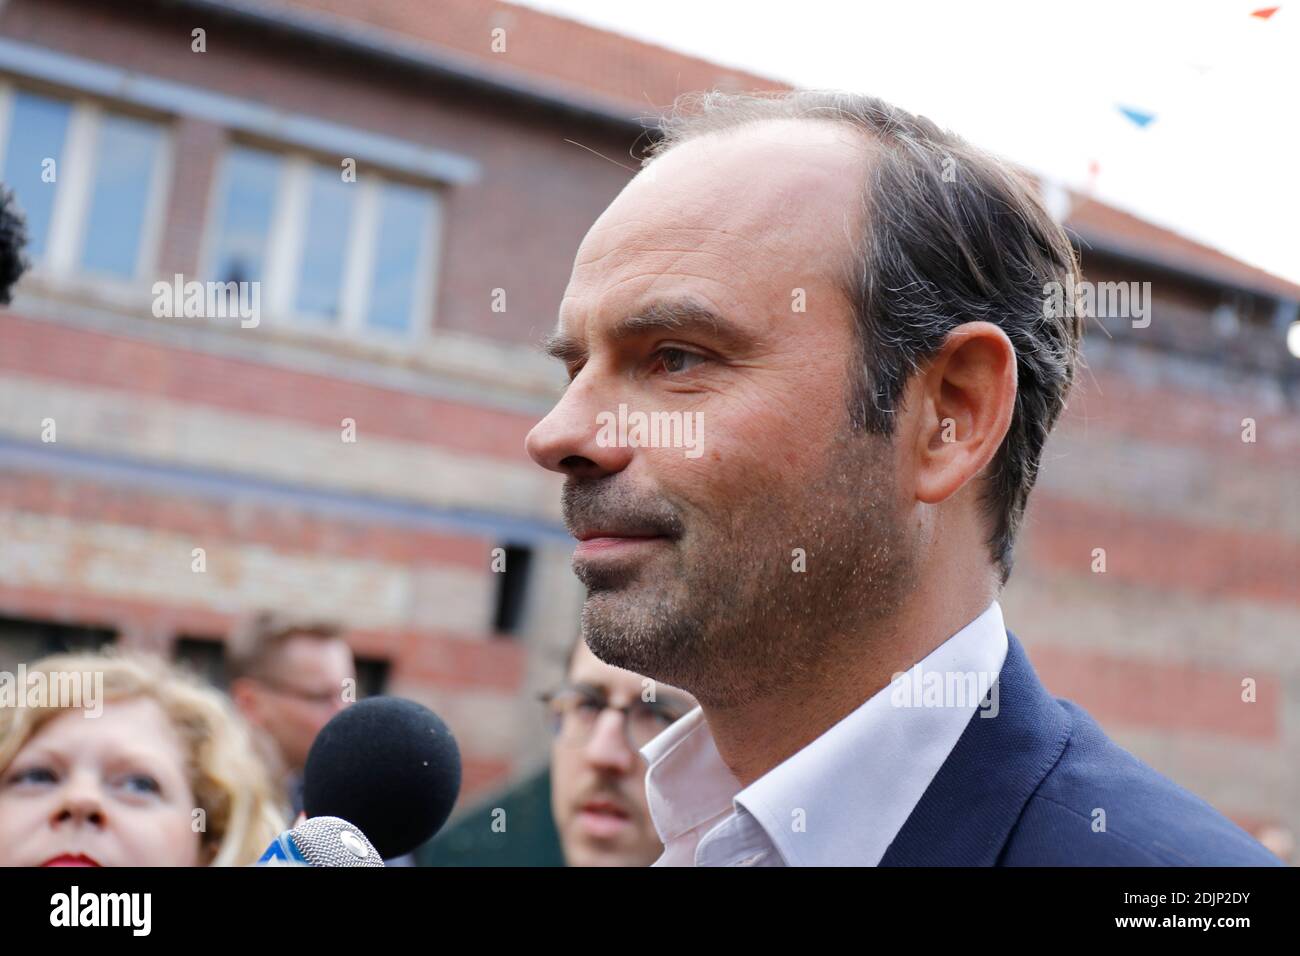 Edouard Philippe Mayor of Le Havre and counselor of 'Les Republicains' candidate for the primary of presidential elections Alain Juppé with young people during a political Meeting in Malakoff, suburb of Paris, France on October 8th, 2016. Photo by Henri Szwarc/ABACAPRESS.COM Stock Photo